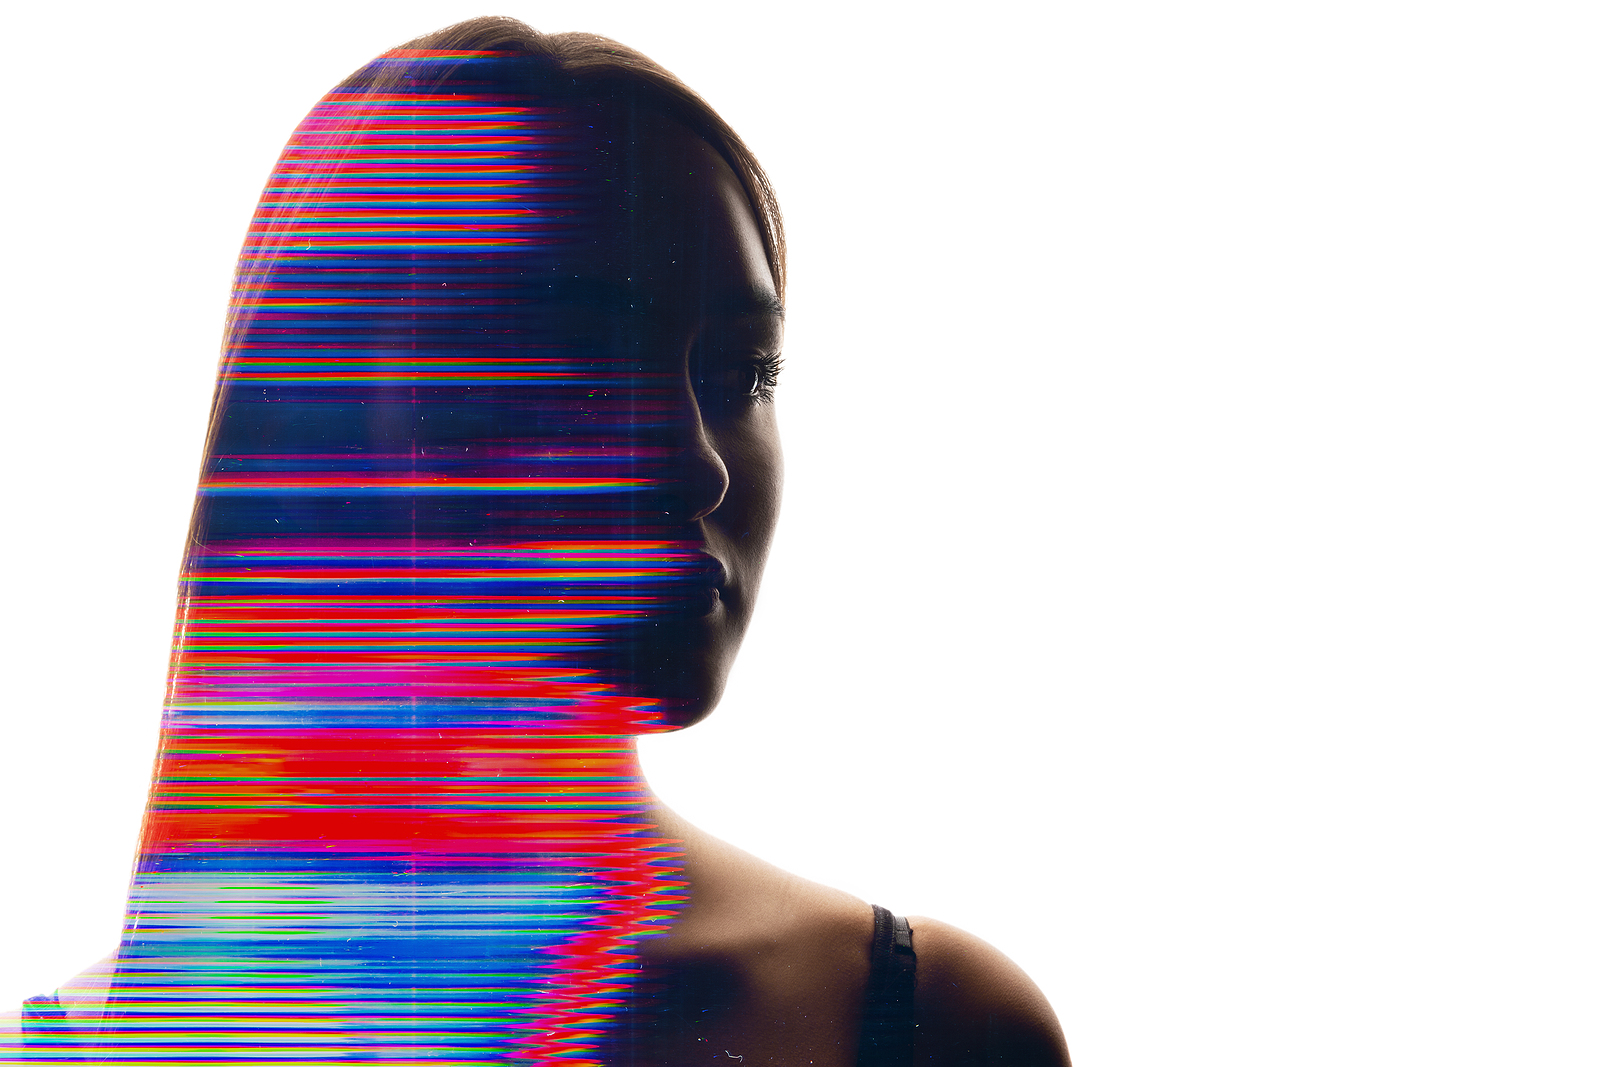 Things You Should Know about Glitch Aesthetics and Glitch Art